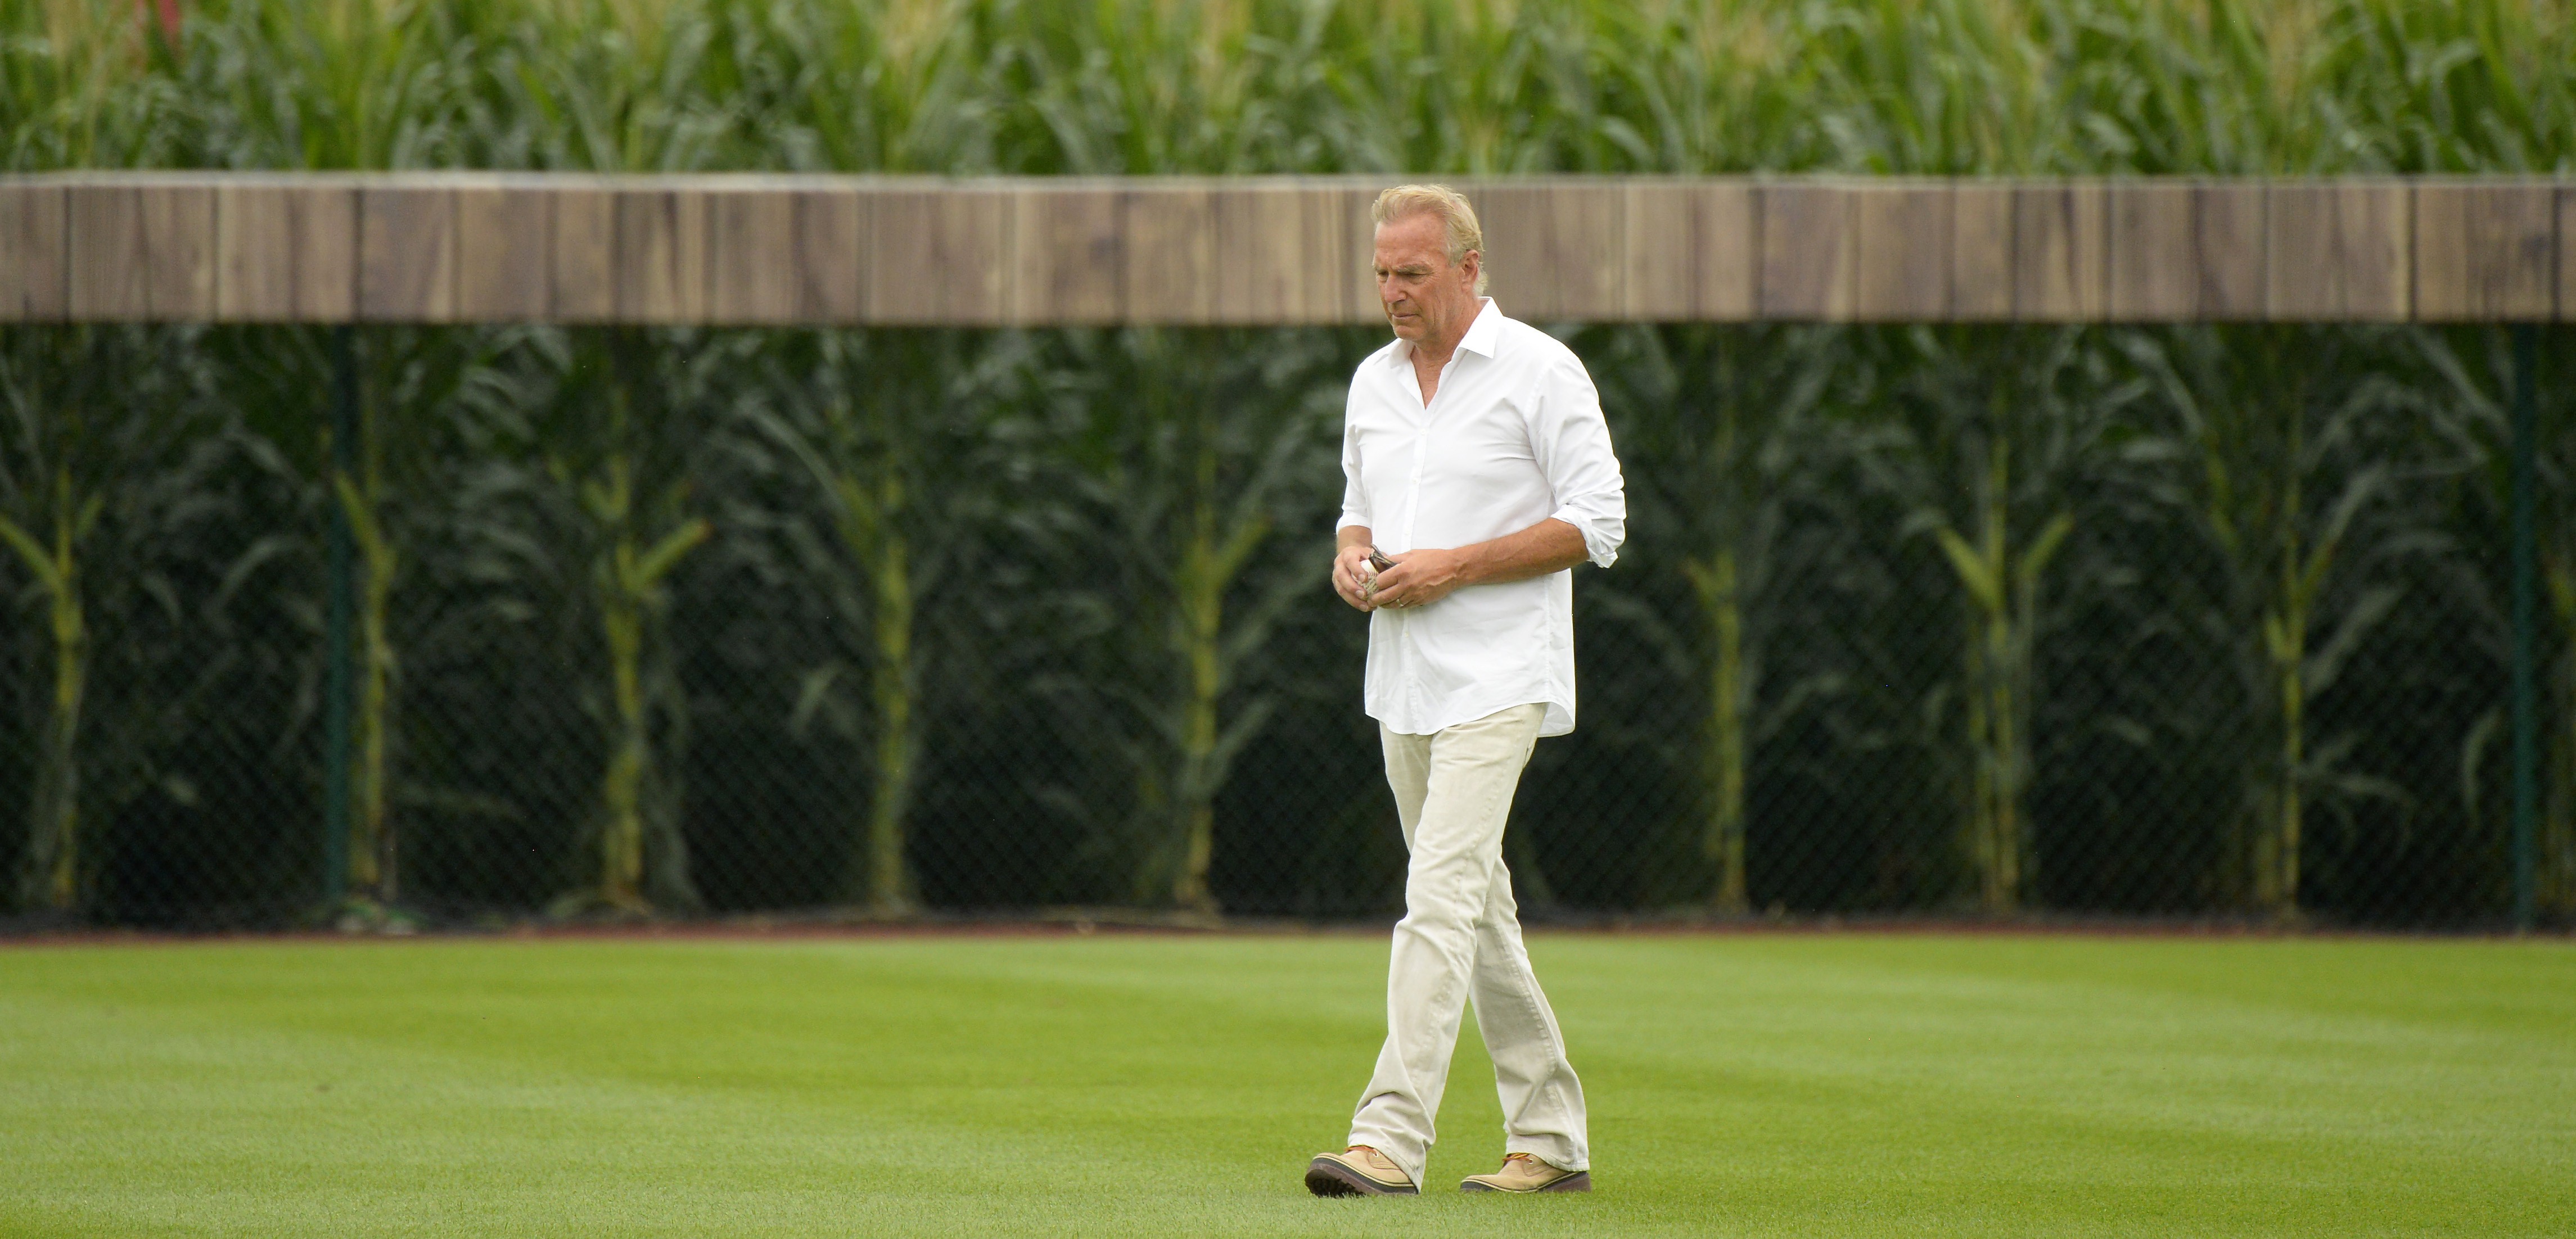 Kevin Costner on August 12, 2021 at Field of Dreams in Dyersville, Iowa. | Source: Getty Images